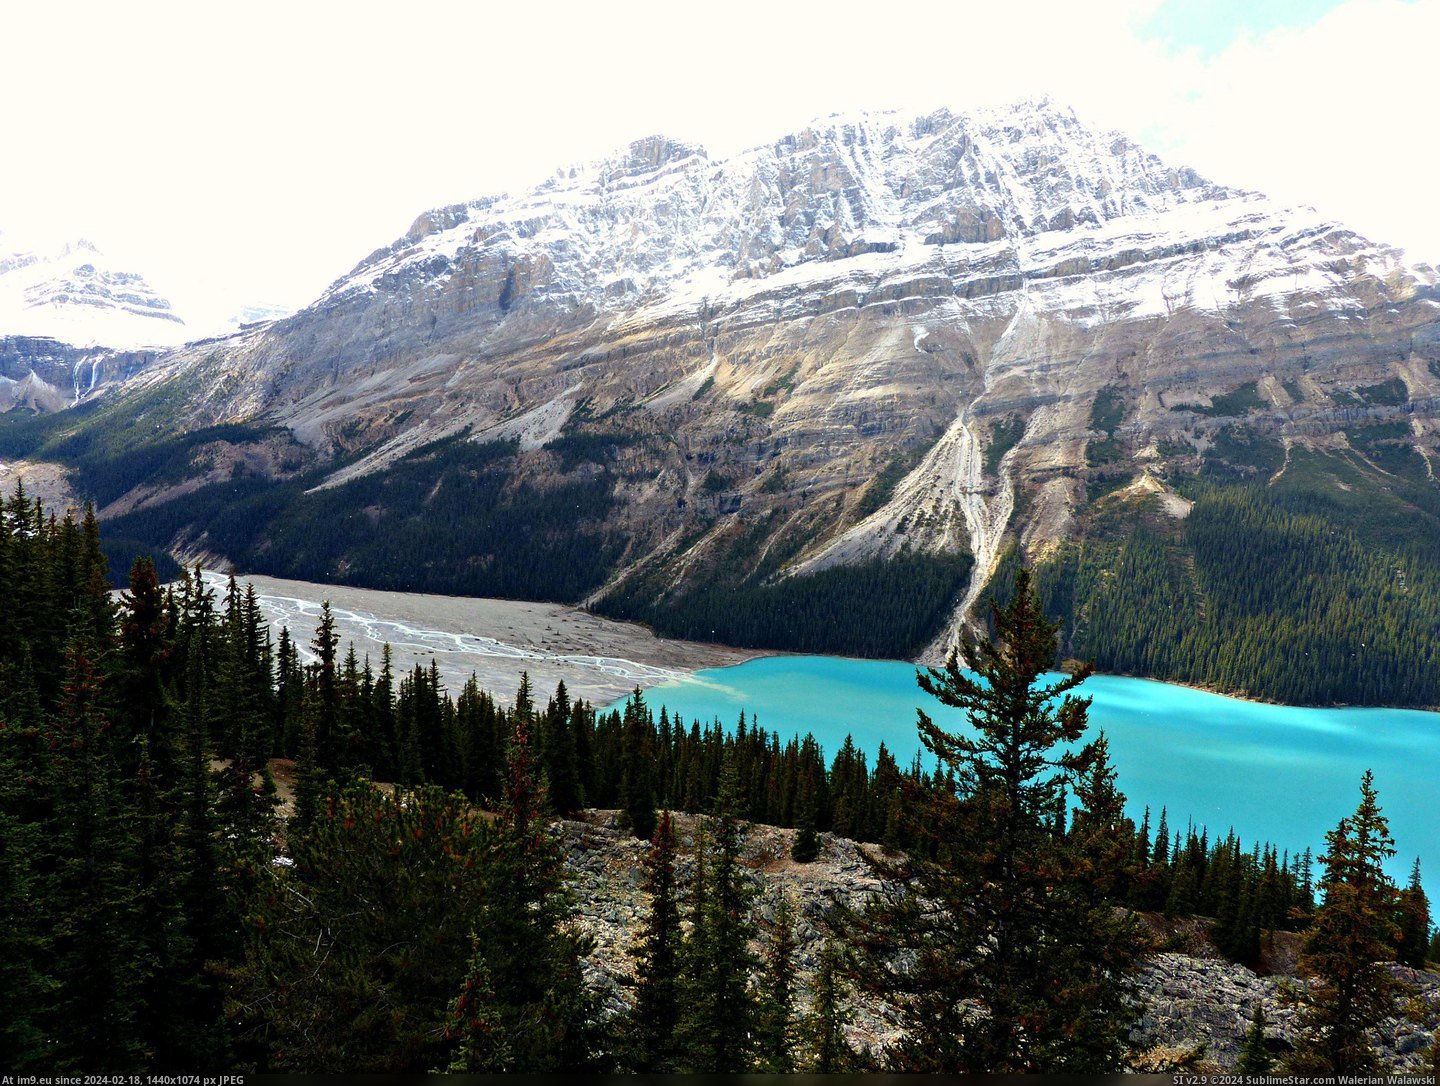 #Lake #Perfection #Peyto #Canada [Earthporn] First post! Cyan perfection at Peyto Lake, Canada [3128x2346] Pic. (Image of album My r/EARTHPORN favs))